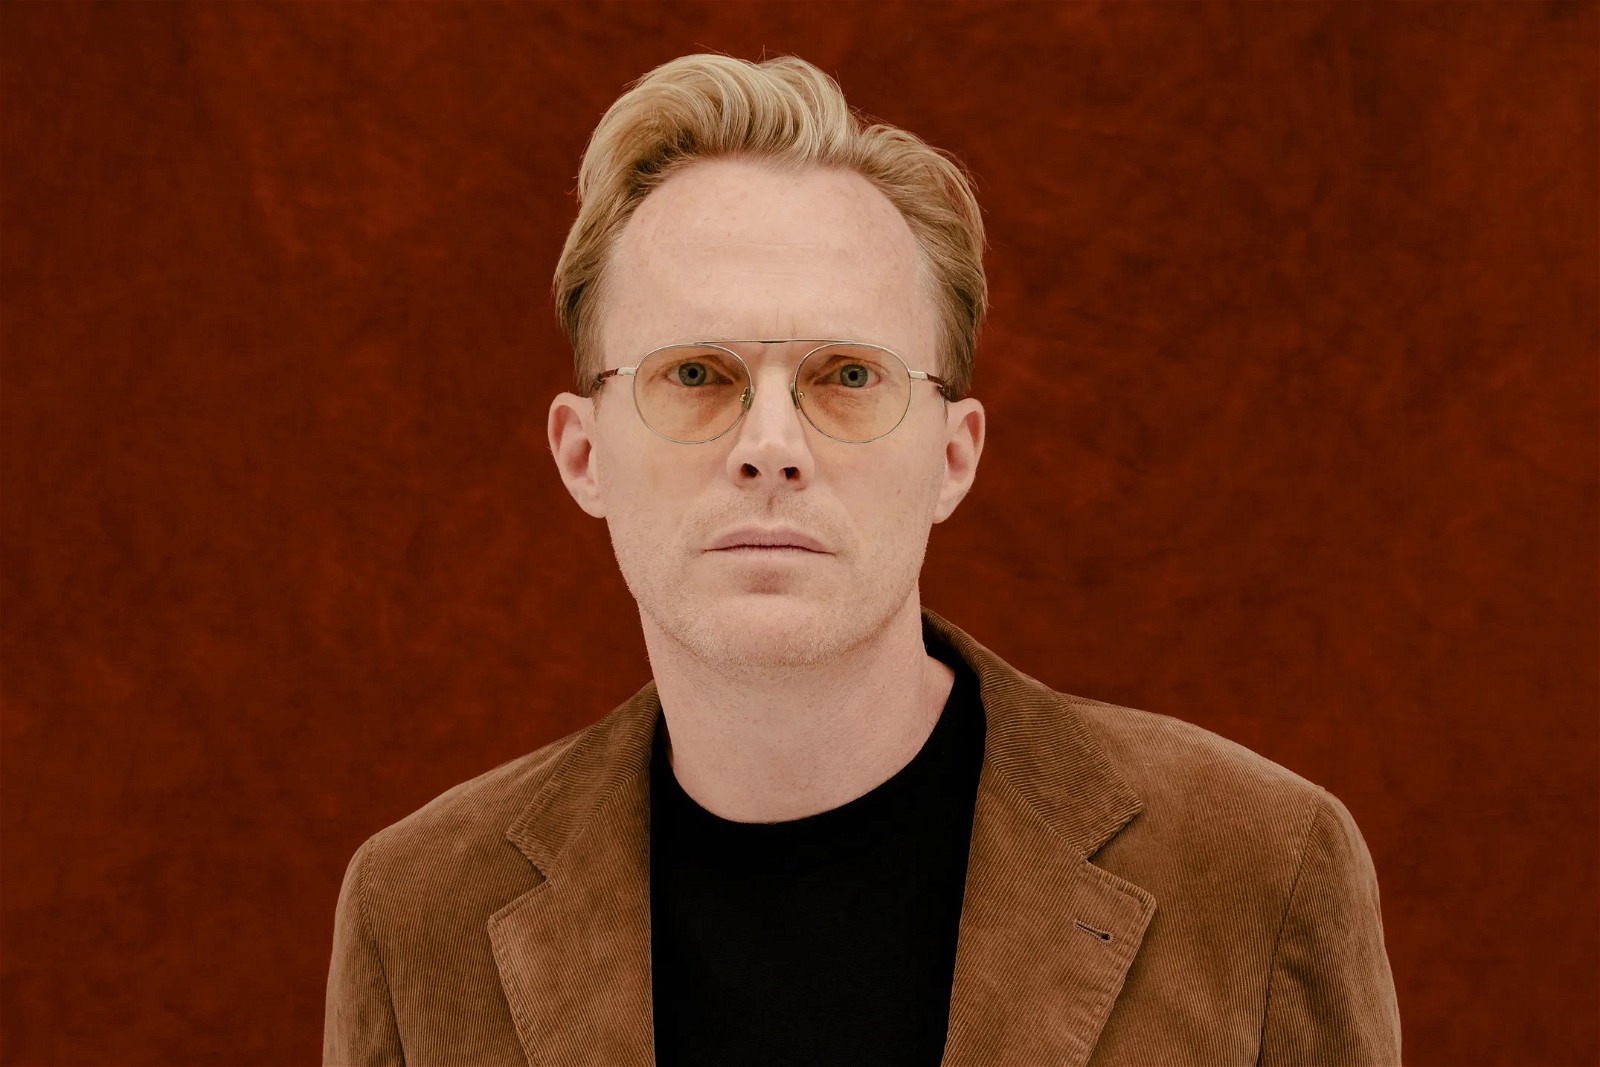 Marvel announces Vision Quest project starring Paul Bettany